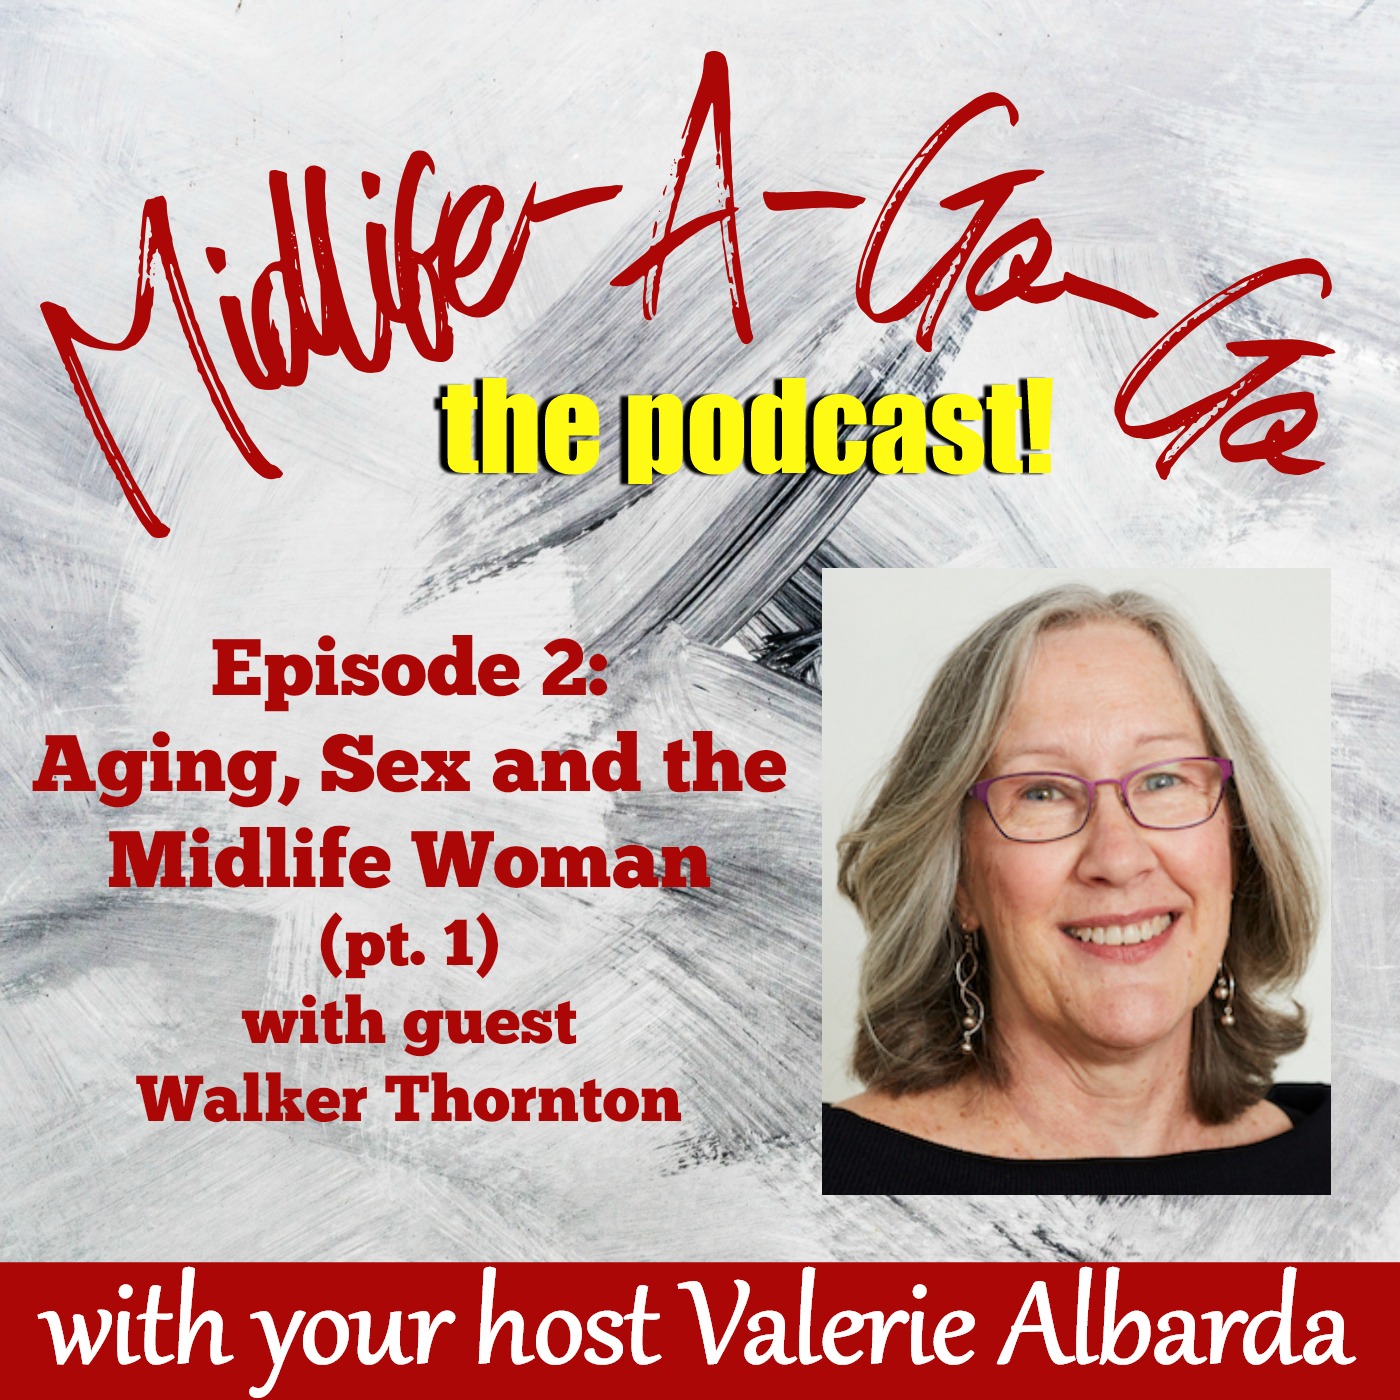 Episode 2: Aging, Sex and the Midlife Woman with Walker Thornton pt. 1